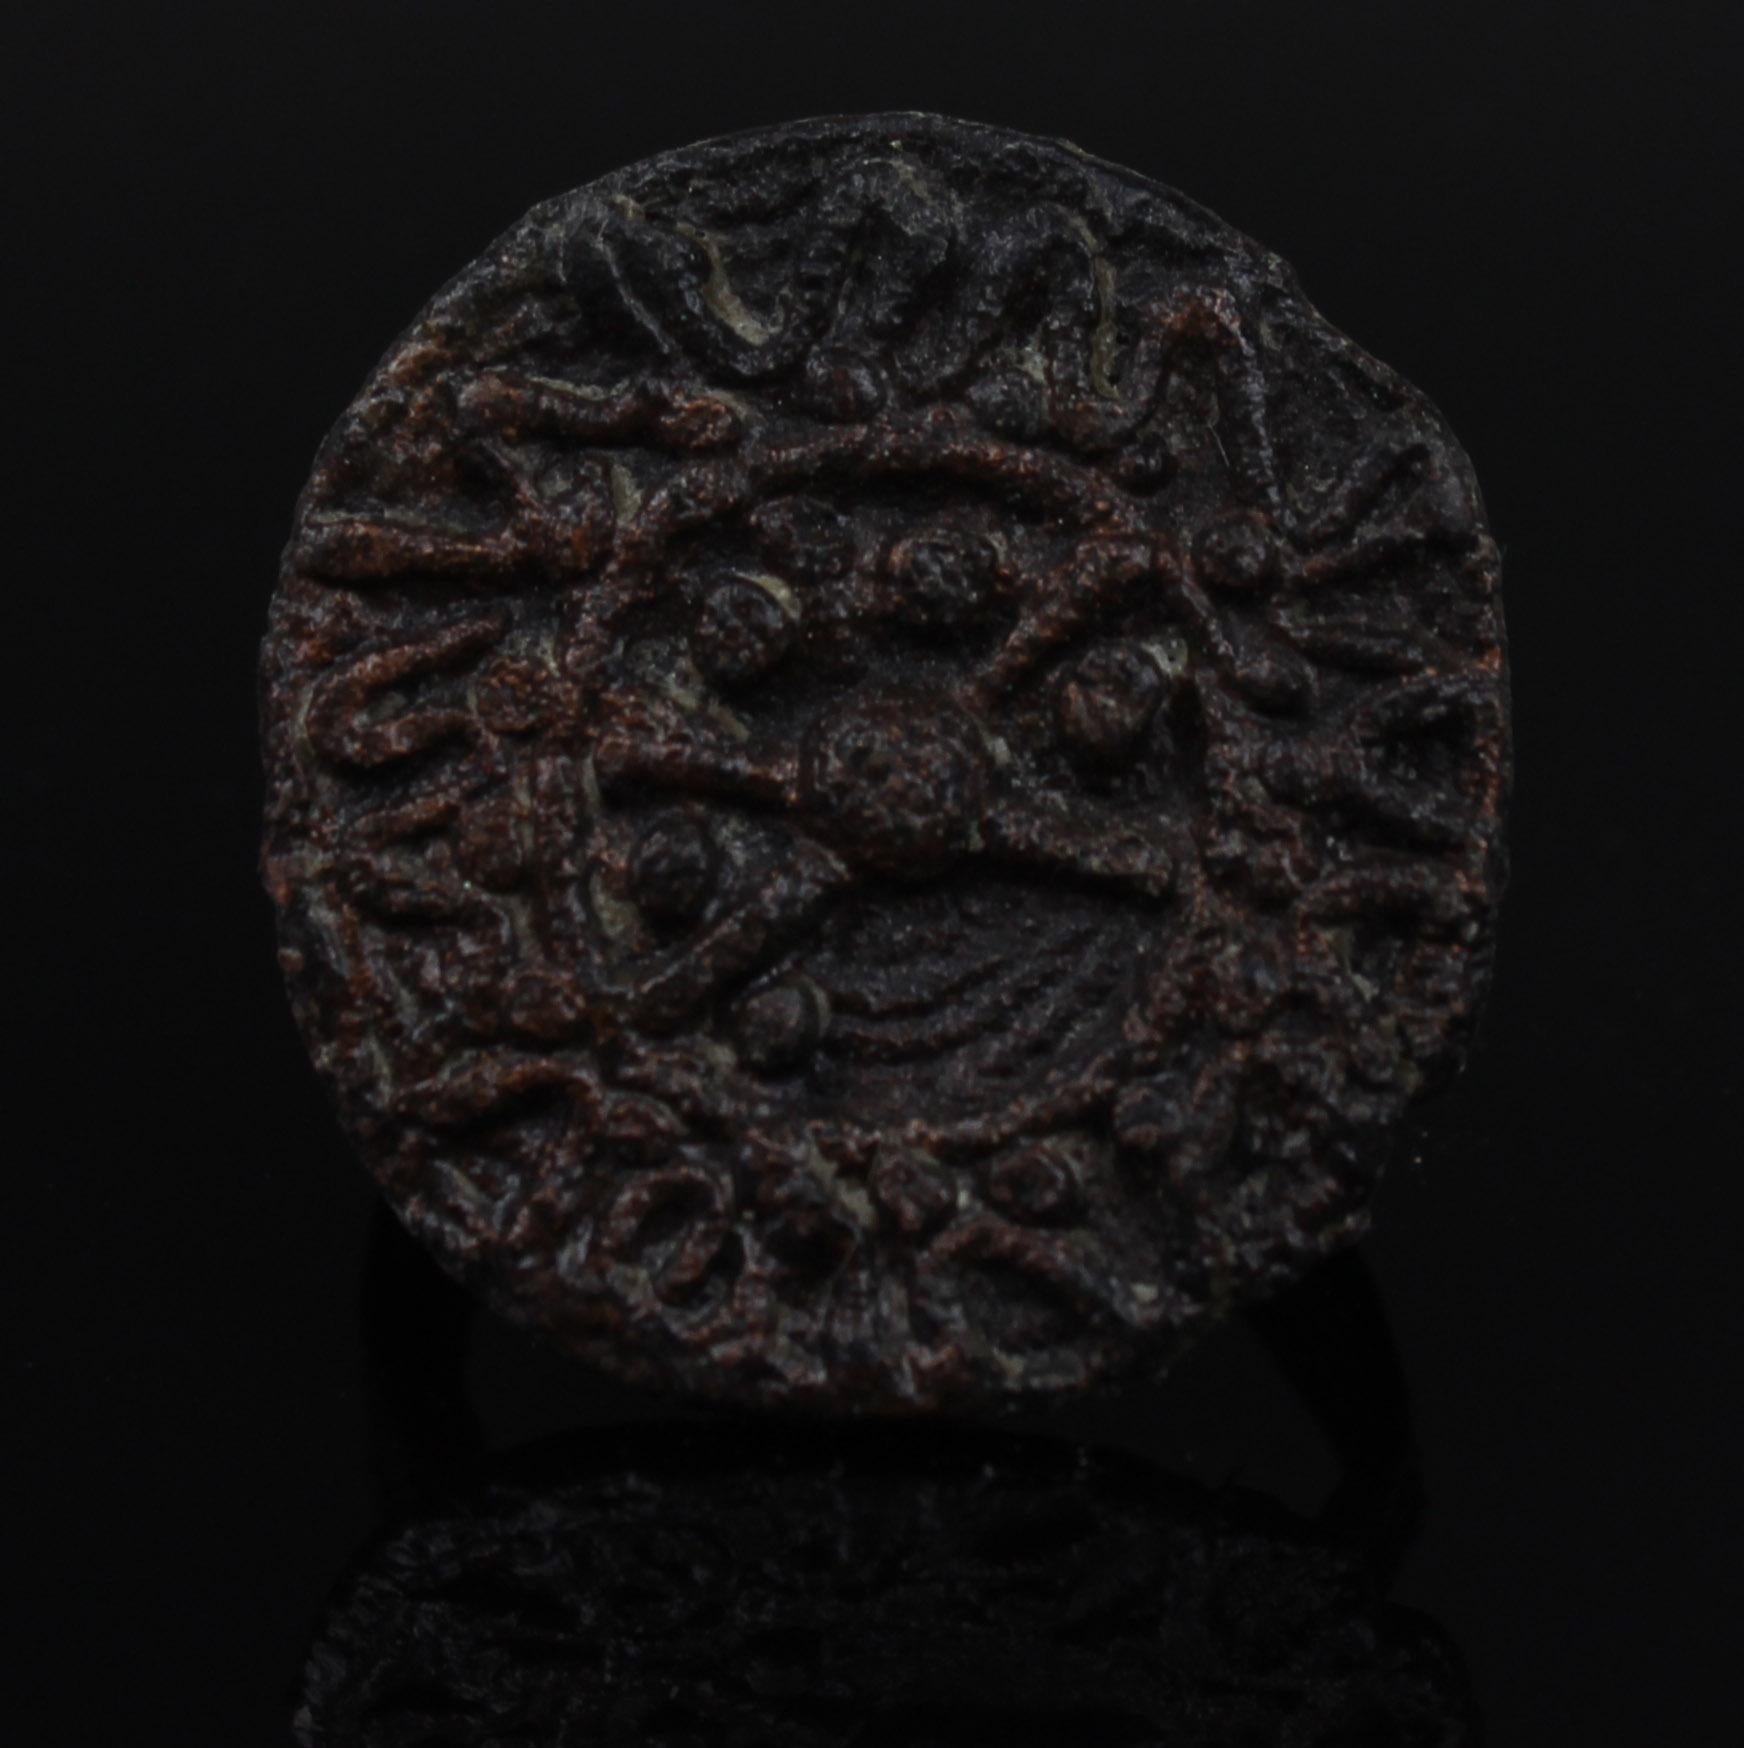 ITEM: Ring
MATERIAL: Bronze
CULTURE: Iron Age, Amlash
PERIOD: 1st millenium B.C
DIMENSIONS: 20 mm x 29 mm diameter
CONDITION: Good condition
PROVENANCE: Ex English private collection, acquired from London Gallery (1970s – 2000s)

Comes with